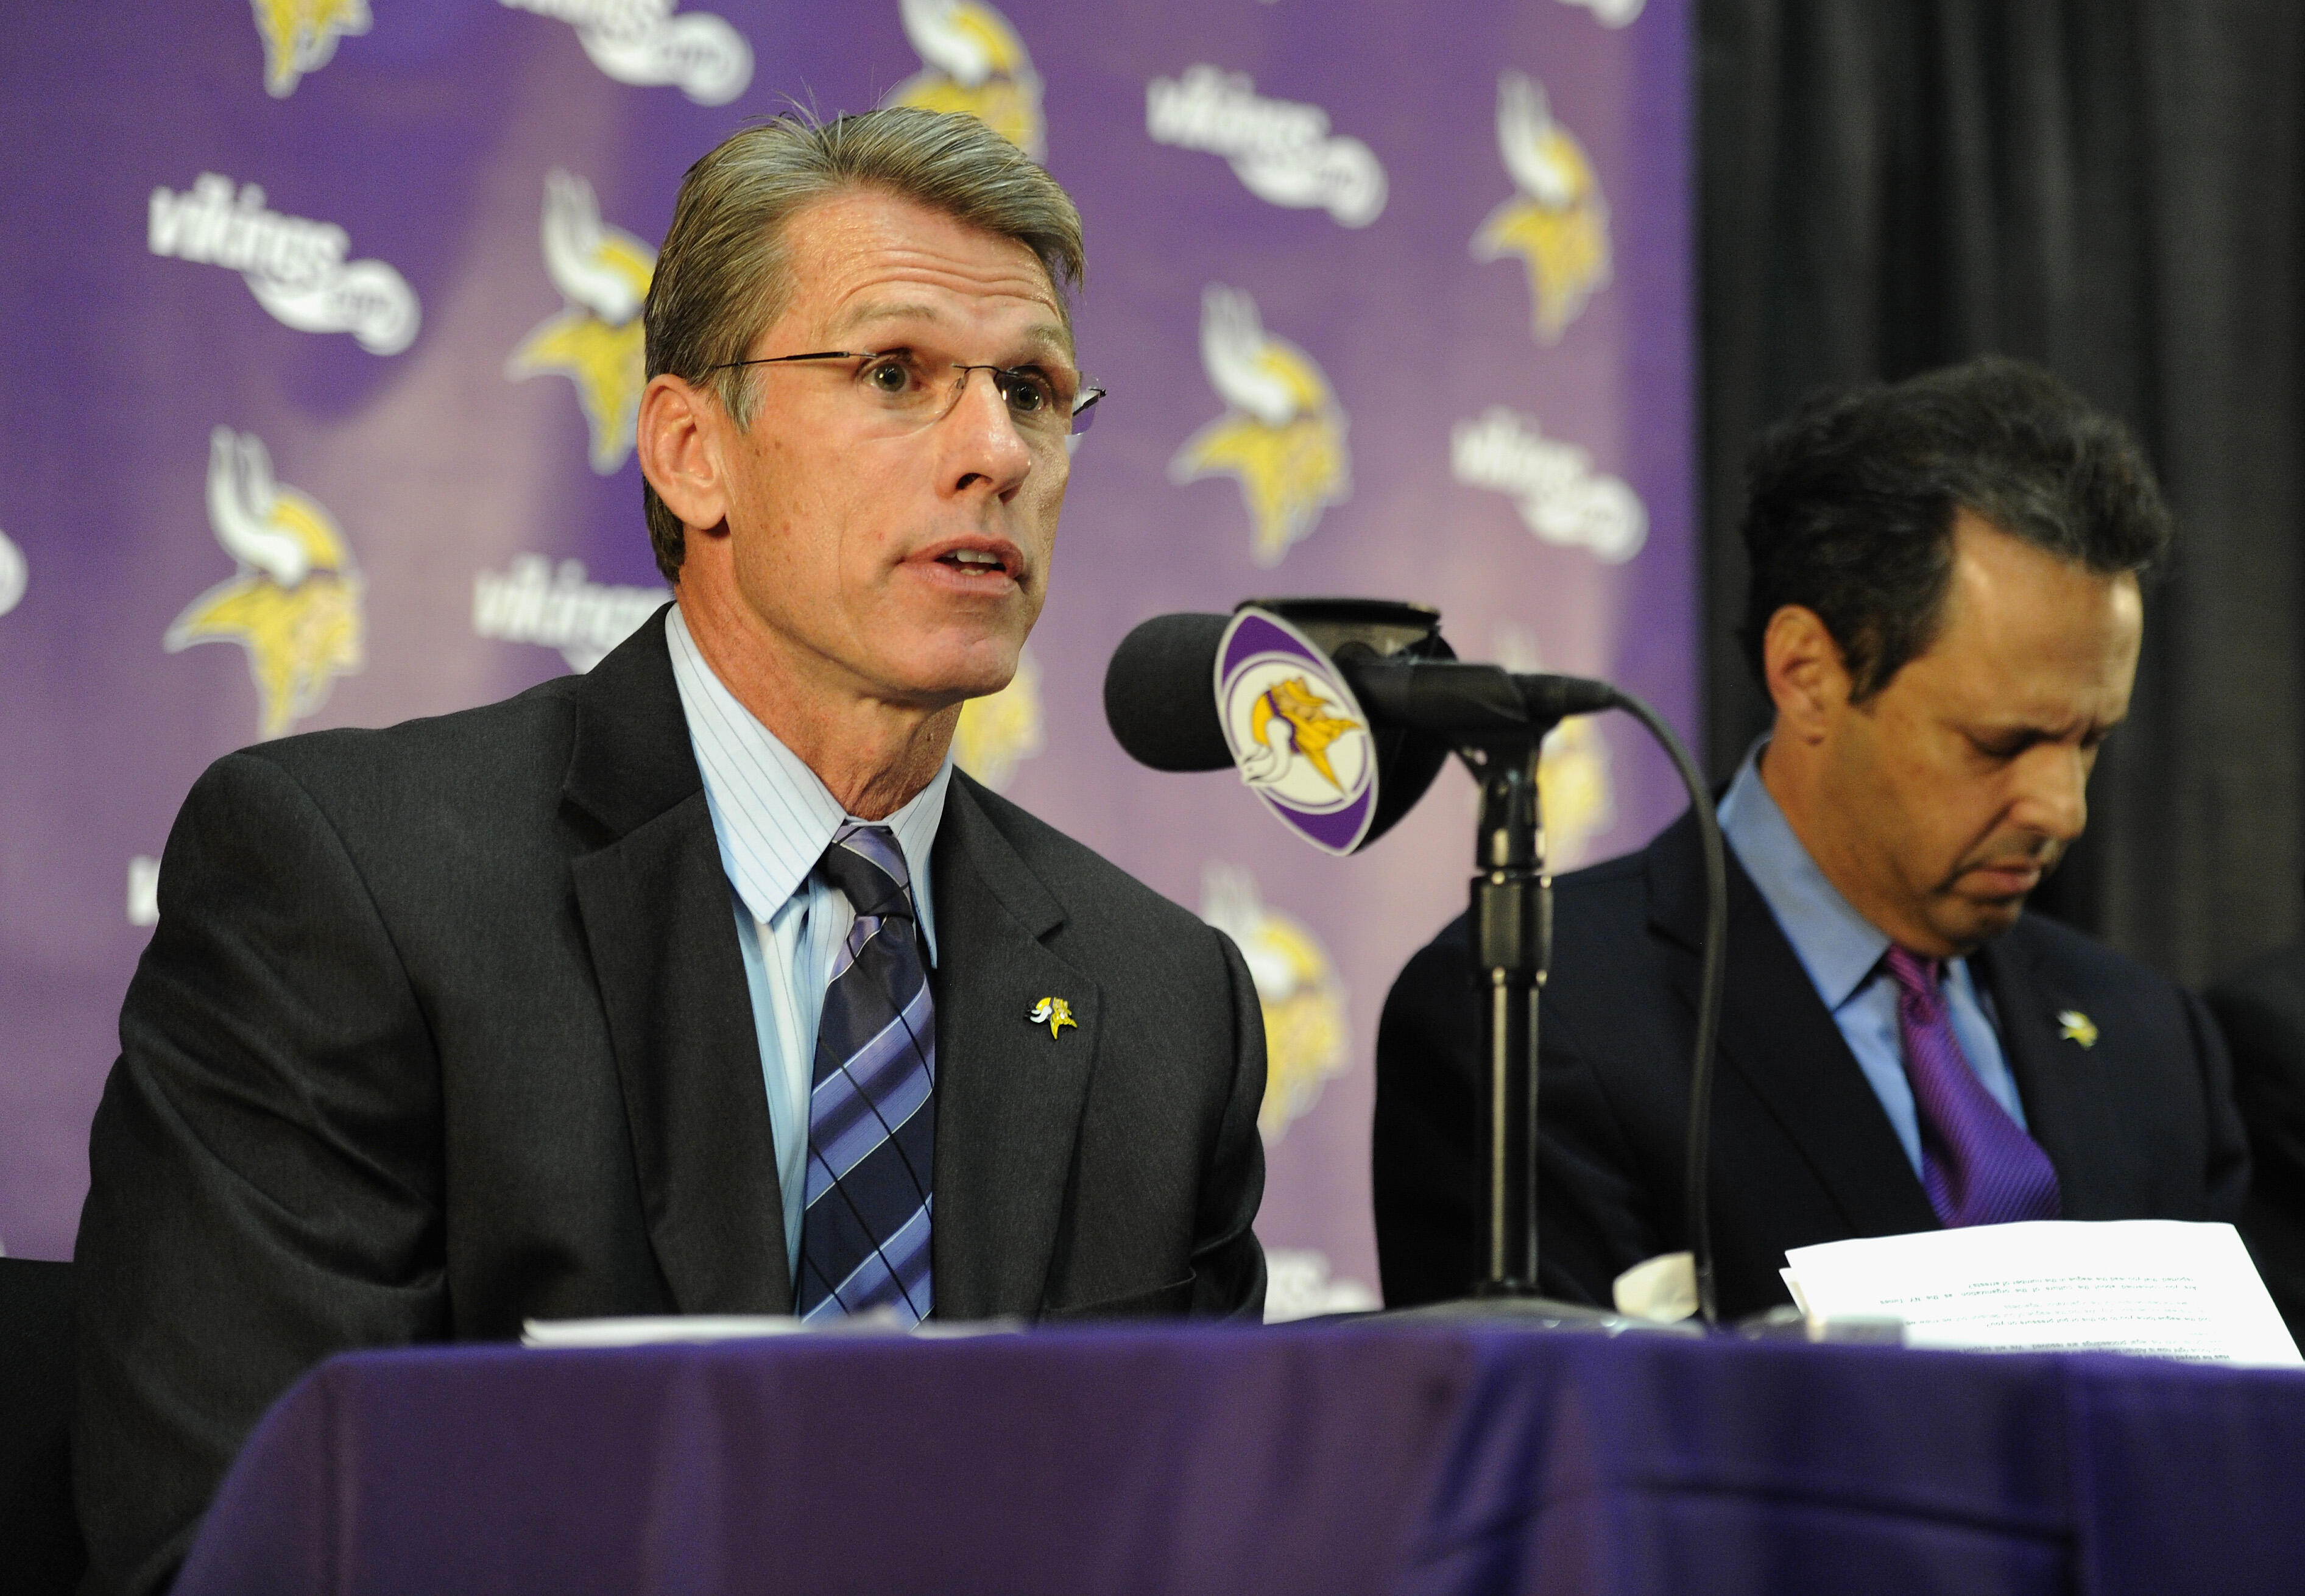 EDEN PRAIRIE, MN - SEPTEMBER 17: General Manager Rick Spielman and Owner Mark Wilf of the Minnesota Vikings speaks to the media during a press conference on September 17, 2014 at Winter Park in Eden Prairie, Minnesota. The Vikings addressed their decision